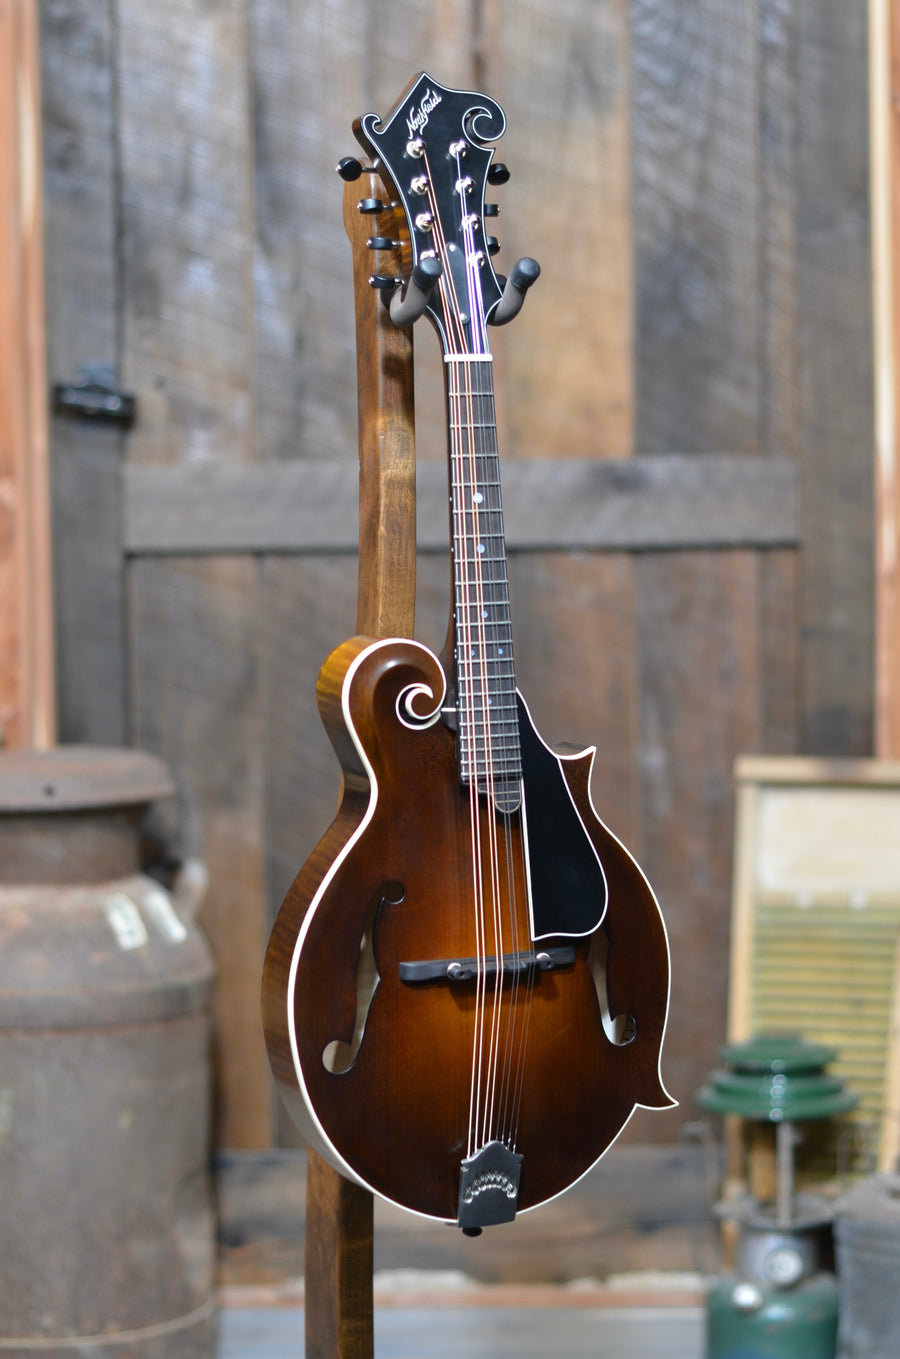 Northfield F5S F-Style Wide-Nut Mandolin With Case - Brown